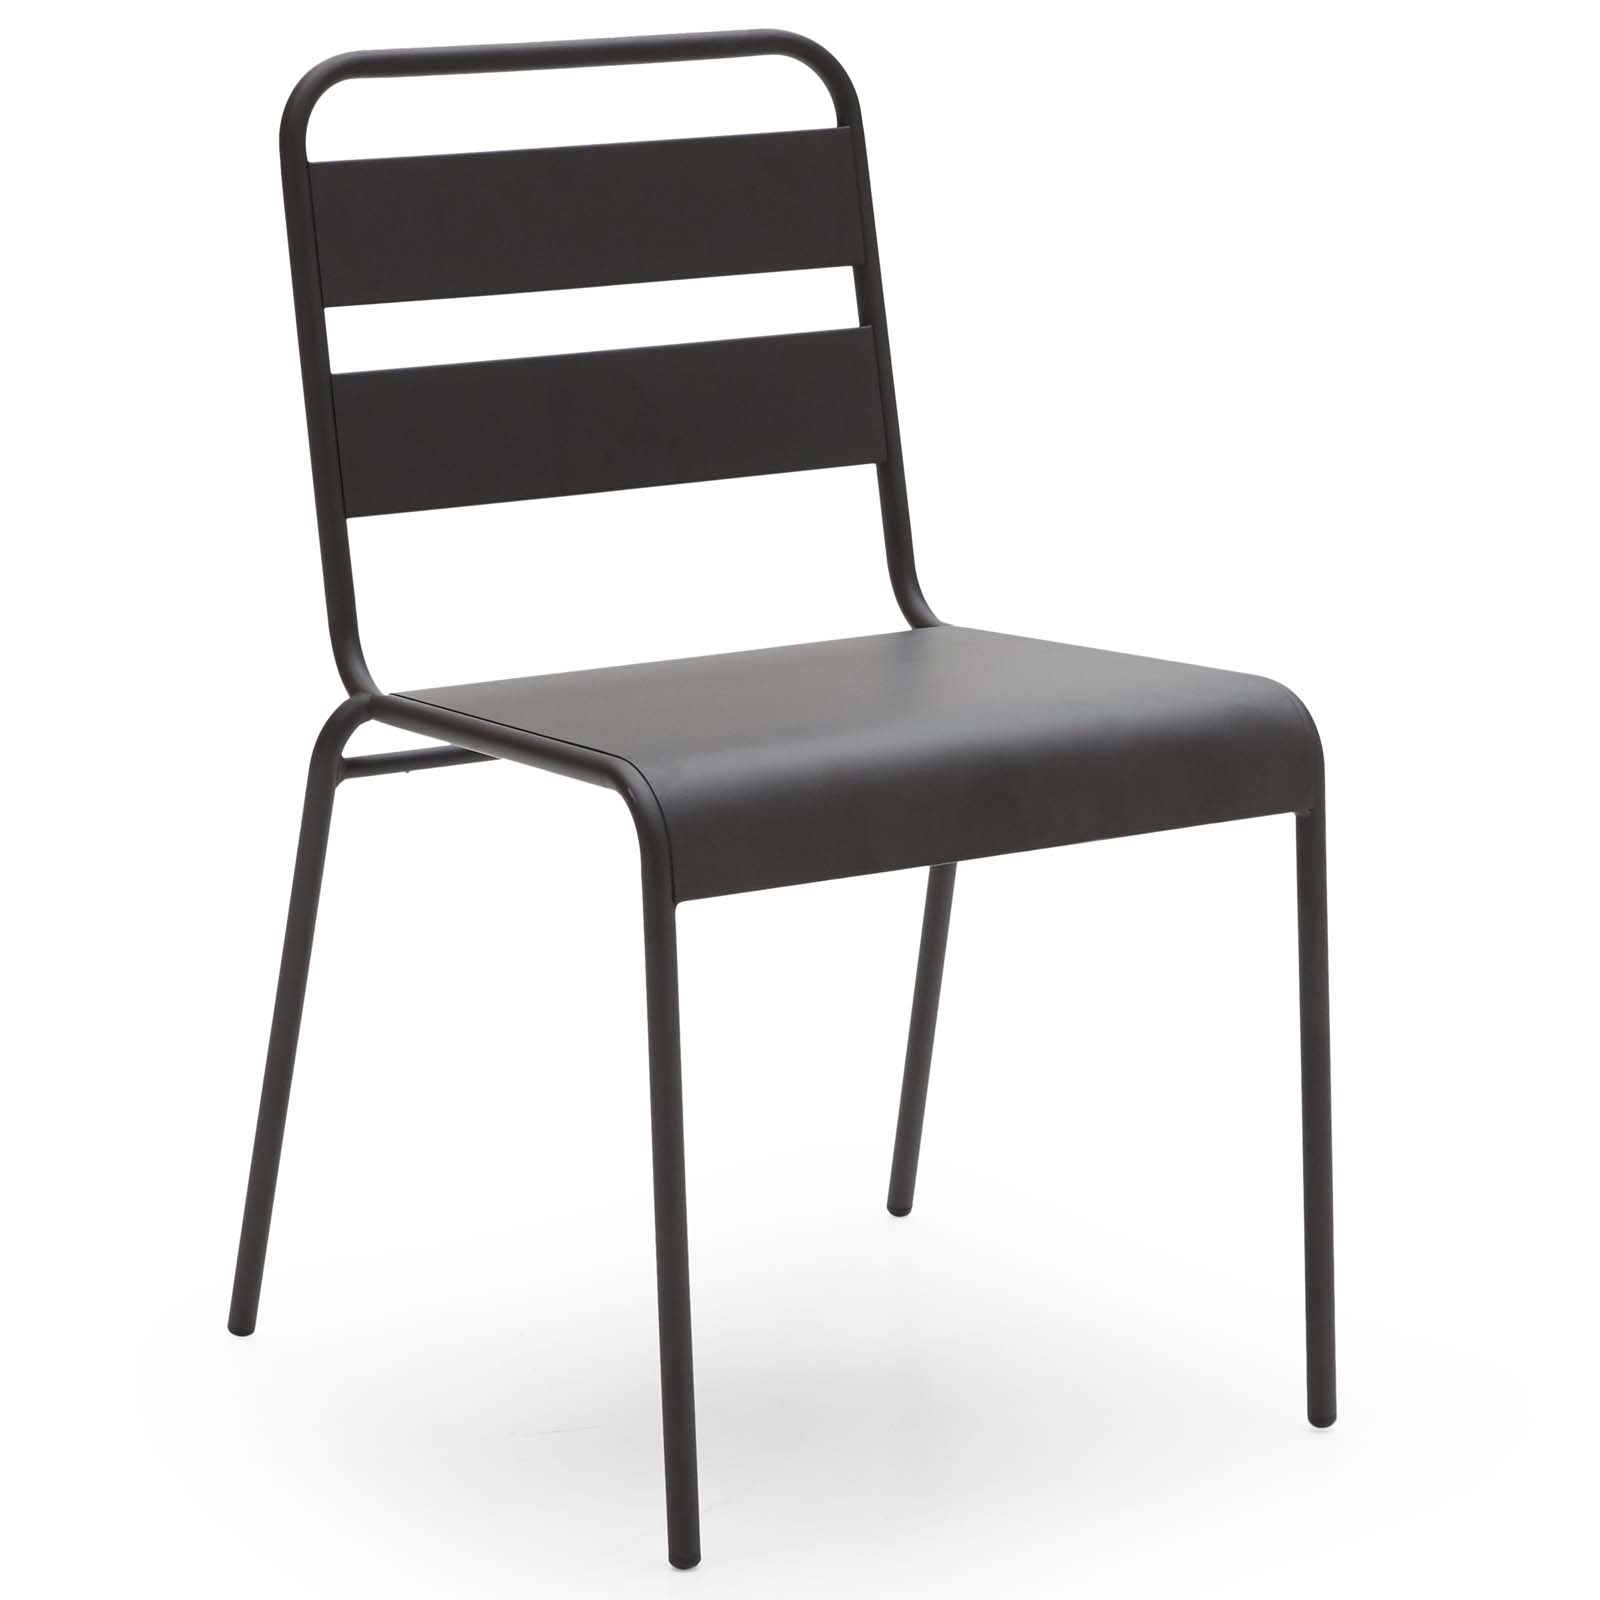 MoDRN Metal Stacking Dining Chairs, Set of 2 - image 4 of 16